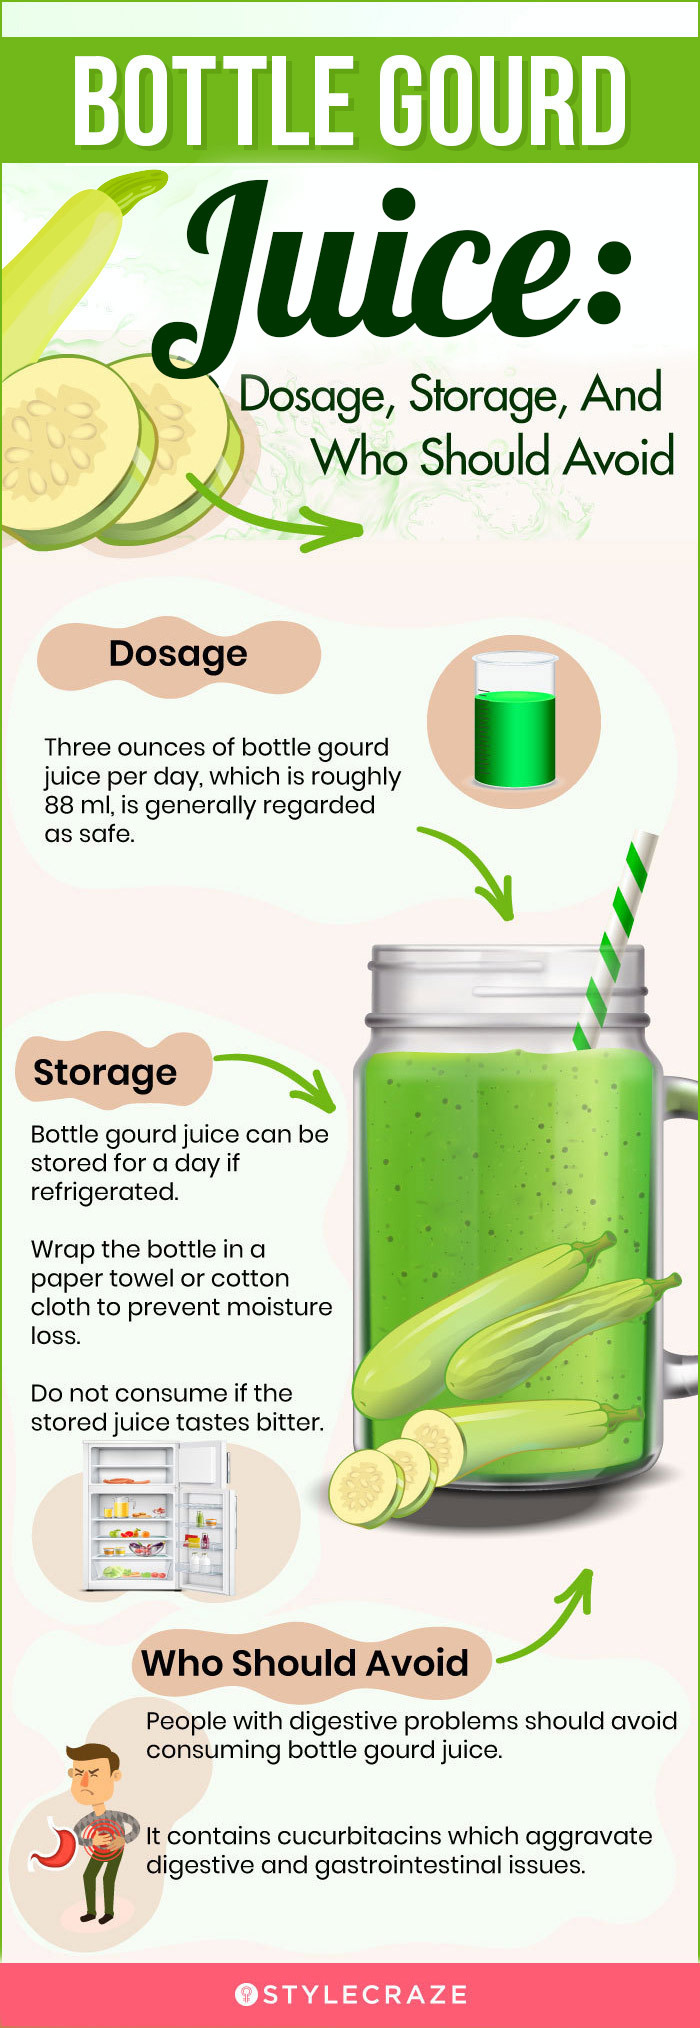 bottle gourd juice dosage storage and who should avoid (infographic)